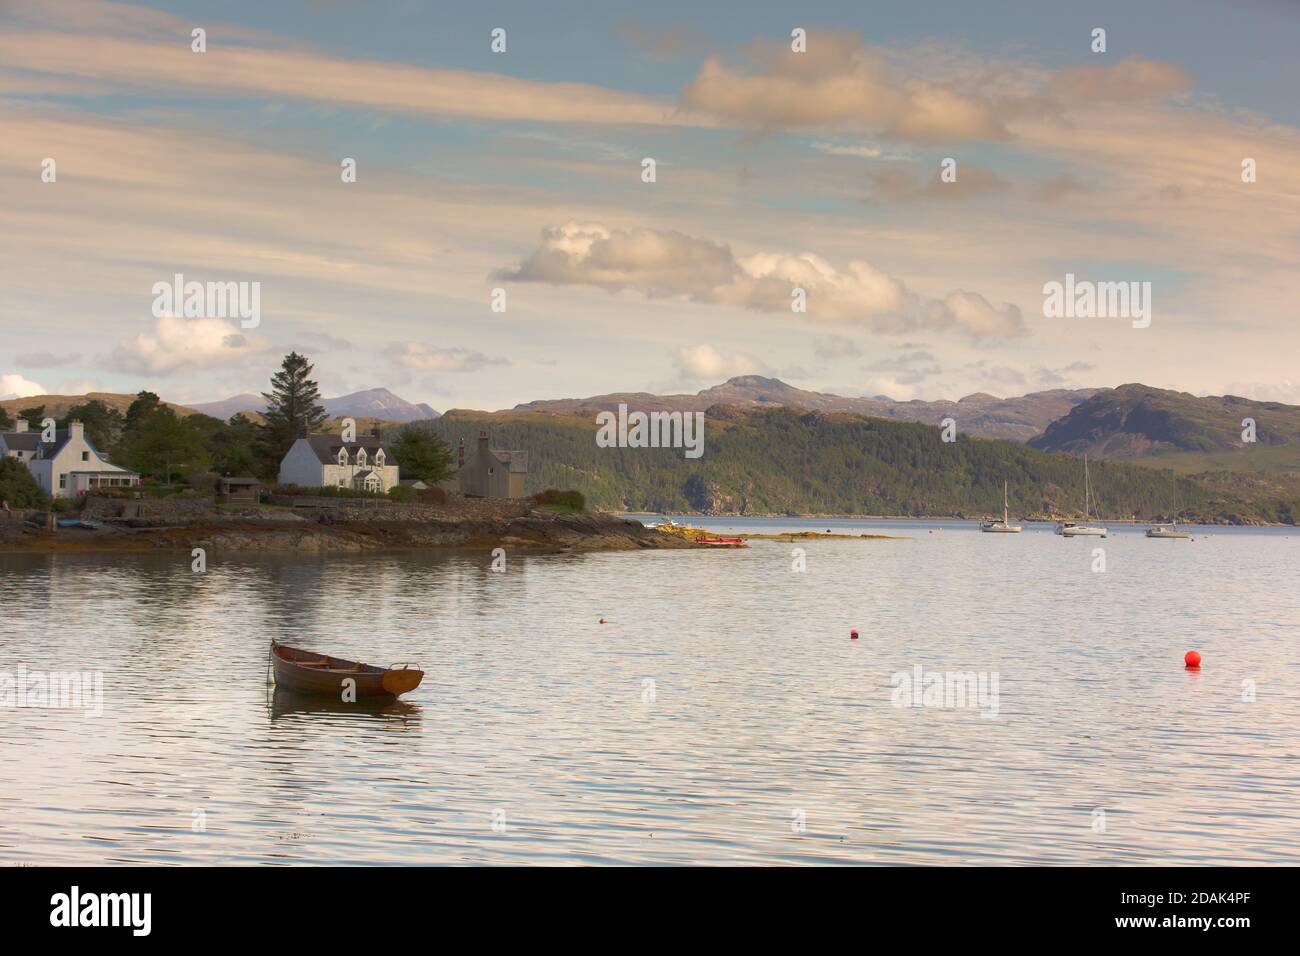 A peaceful scene in Plockton, Wester Ross. A wooden rowing boat bobs on the ebbing tide with white painted cottages on the shoreline. Stock Photo